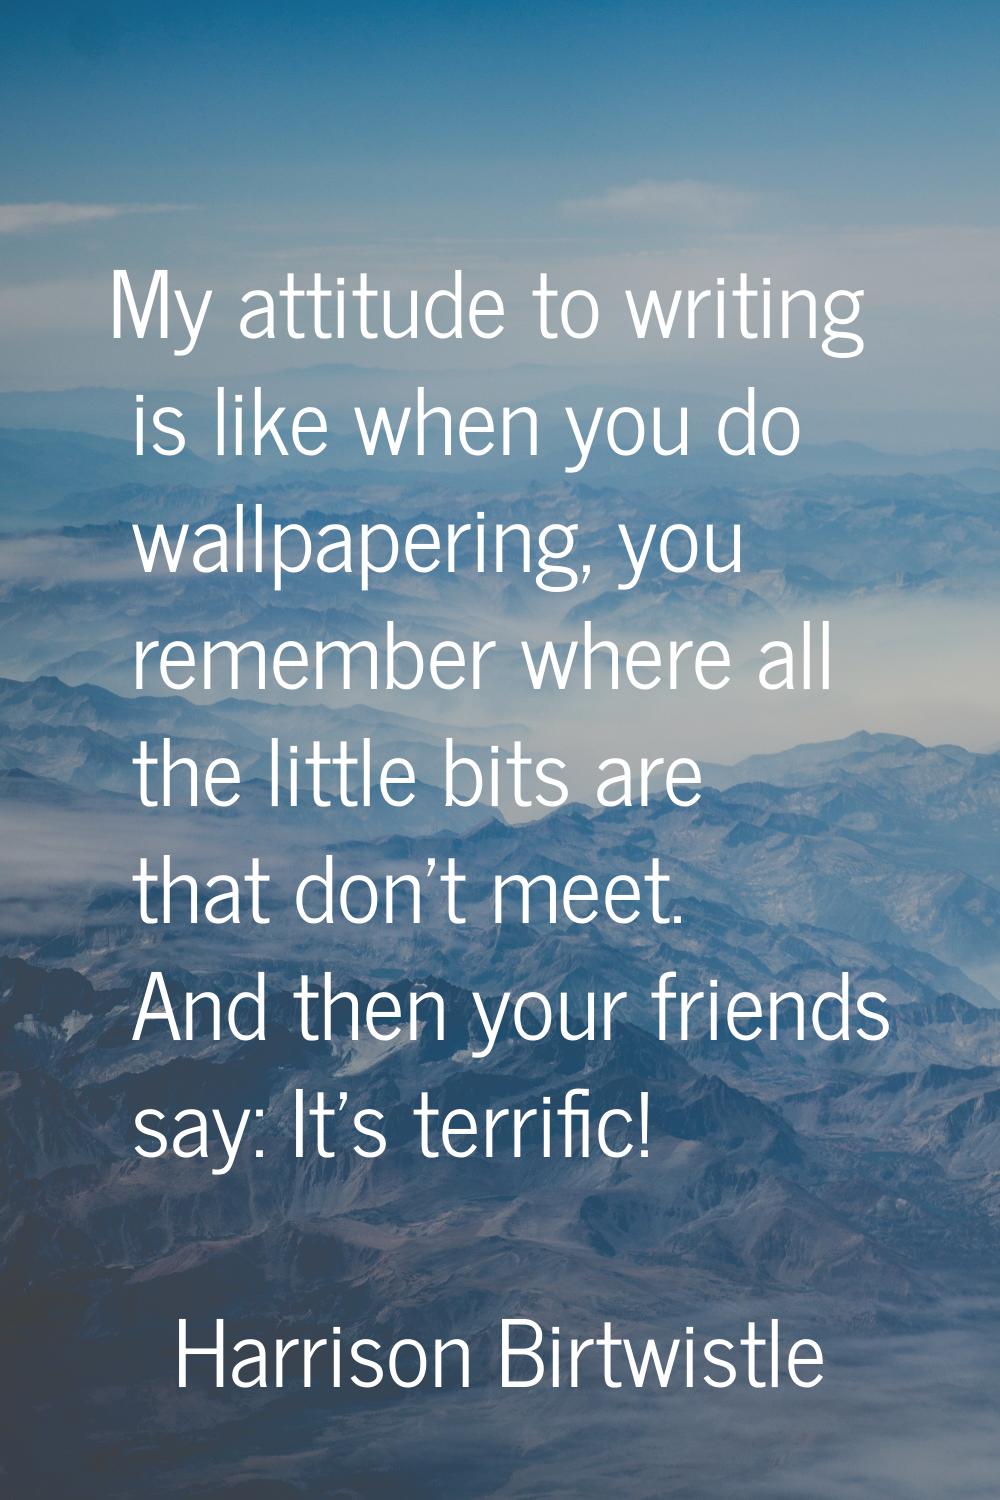 My attitude to writing is like when you do wallpapering, you remember where all the little bits are